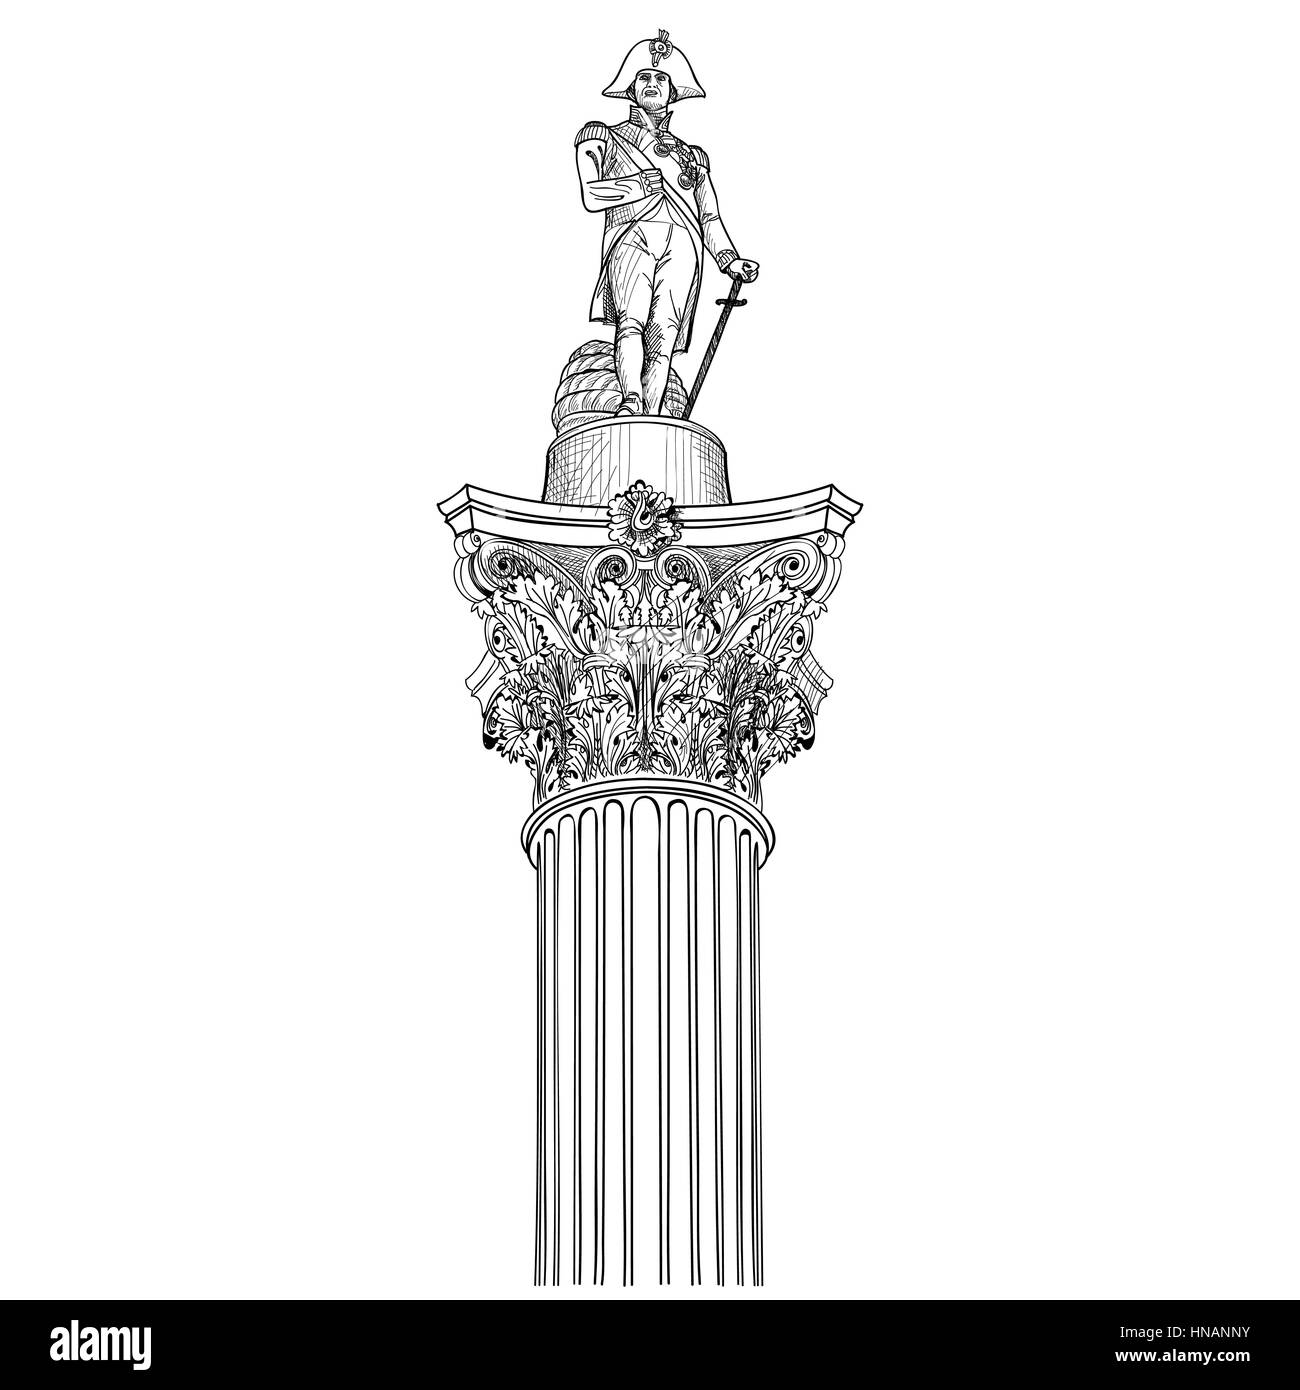 Nelson colounm isolated. Admiral Nlson statue in Trafalgar Square, London, England, UK. Stock Vector